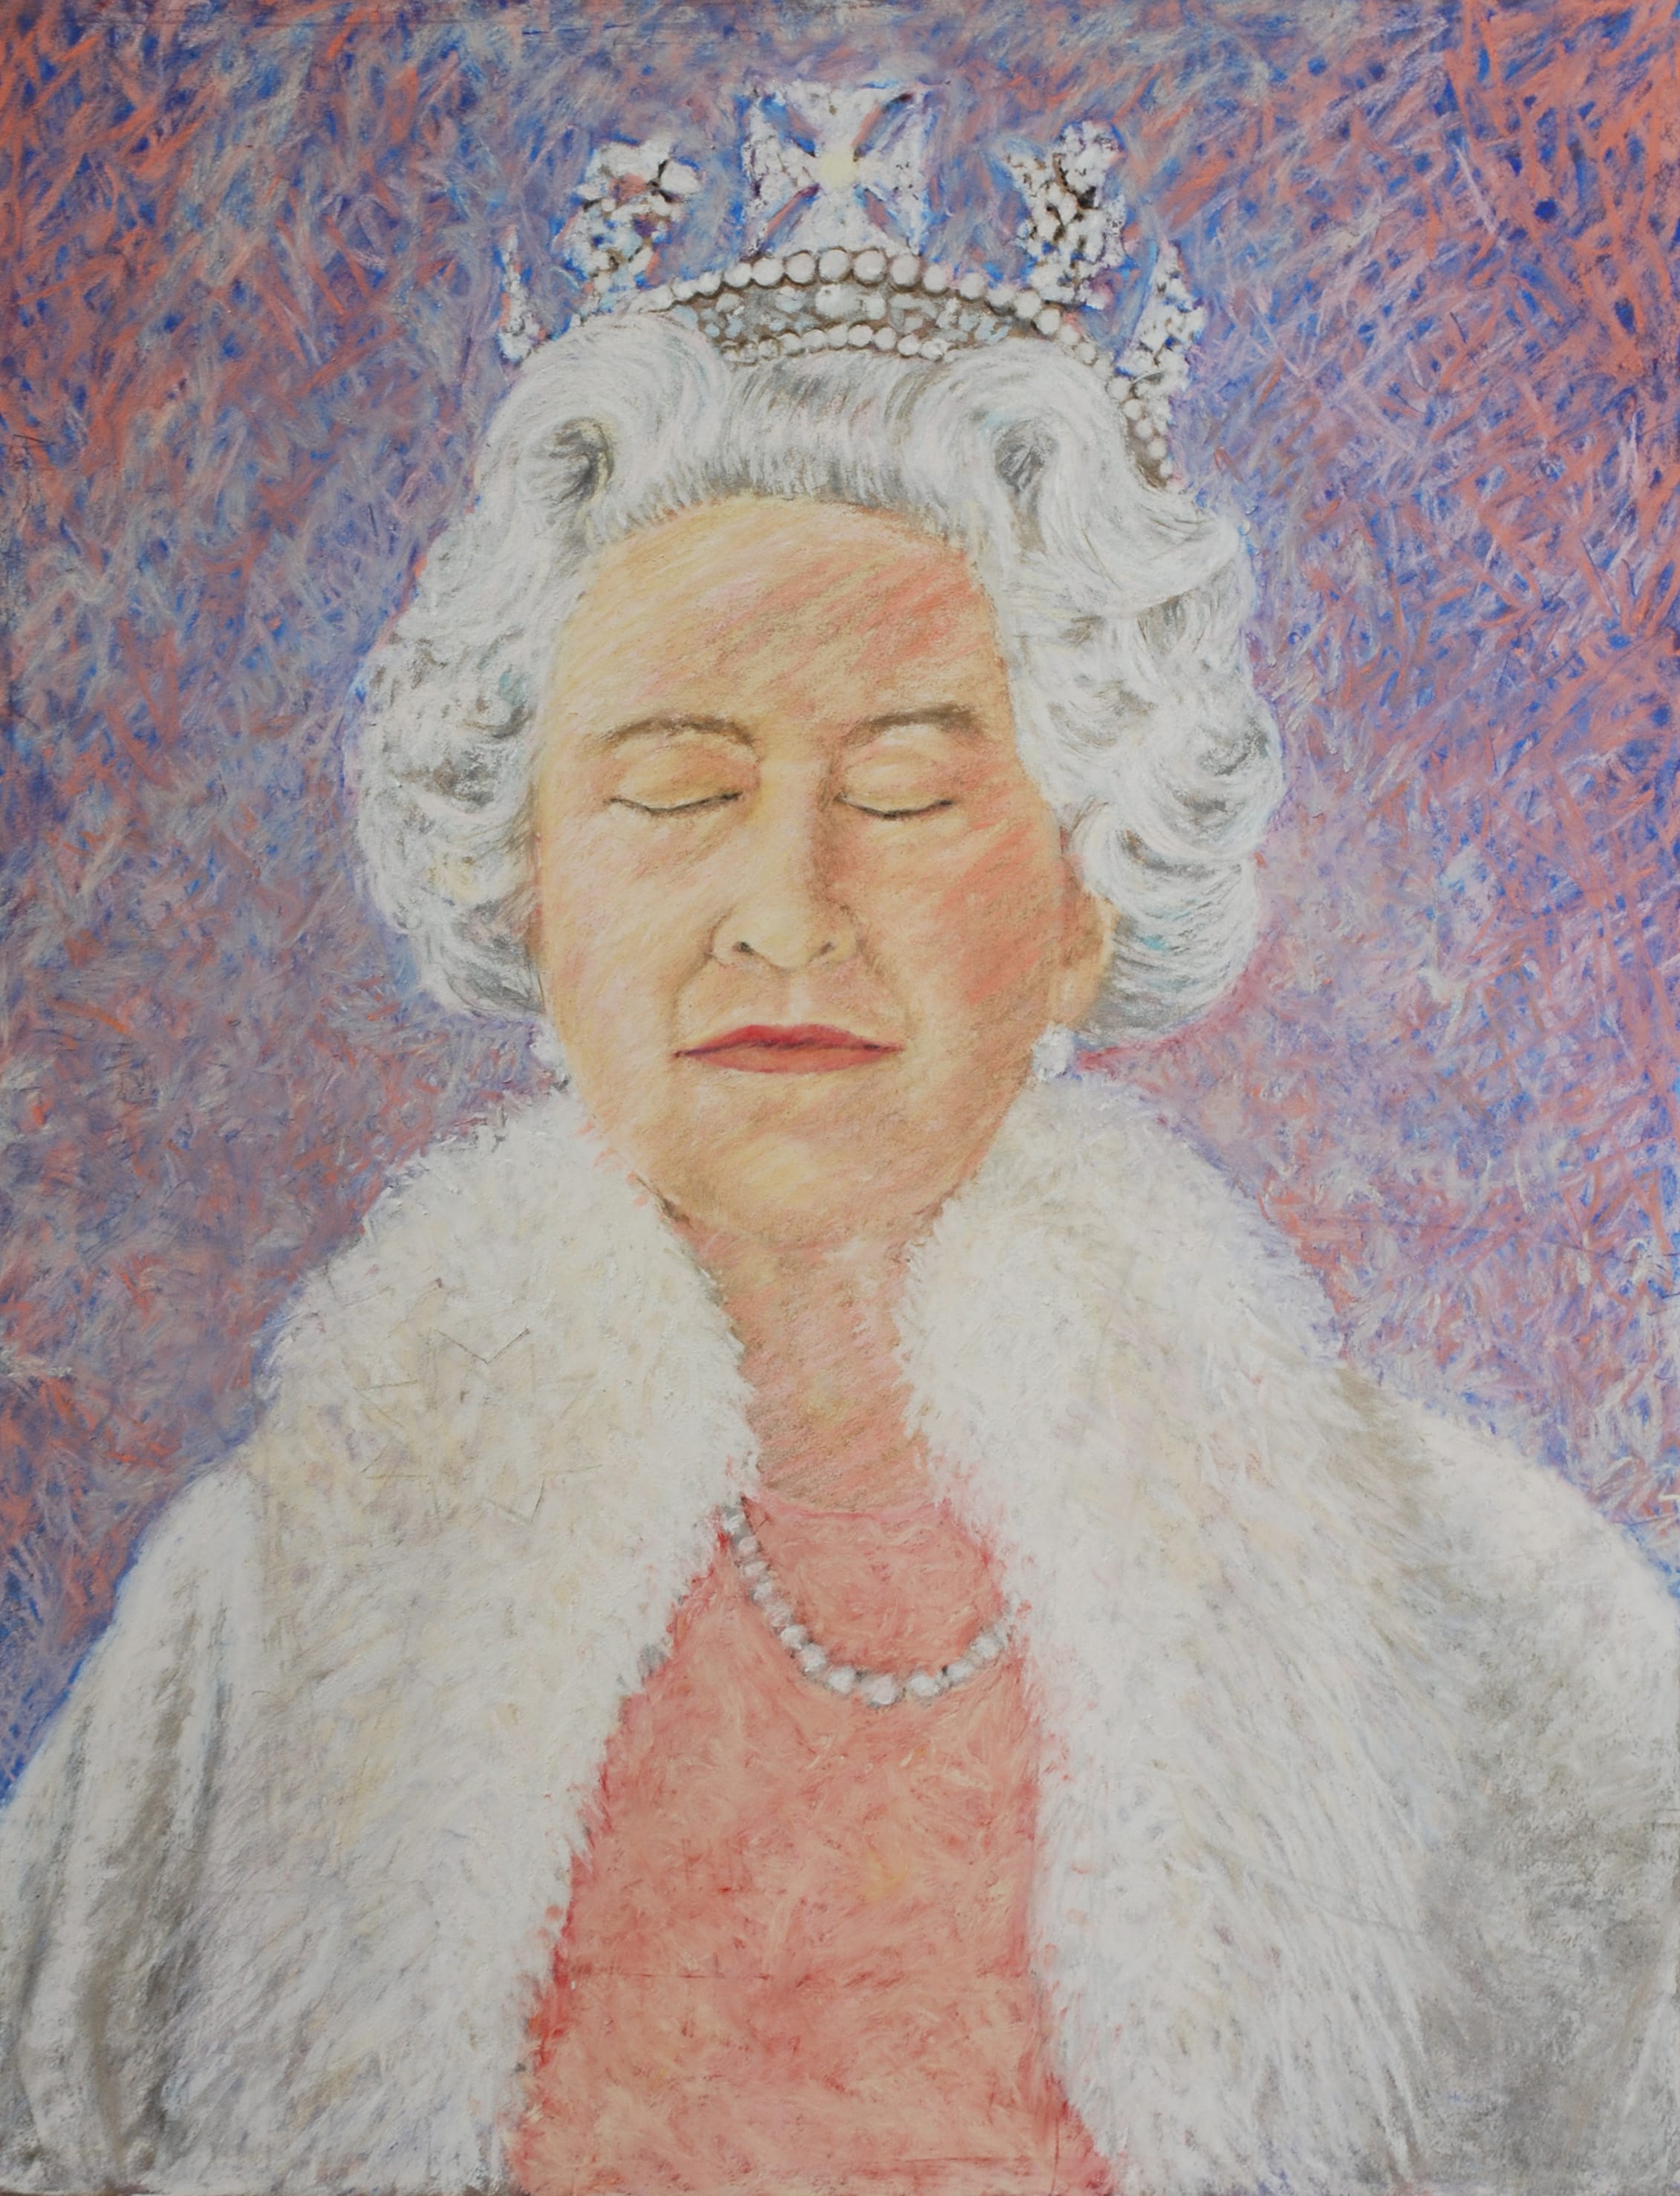  God Save the Queen, 2015, 65x50cm